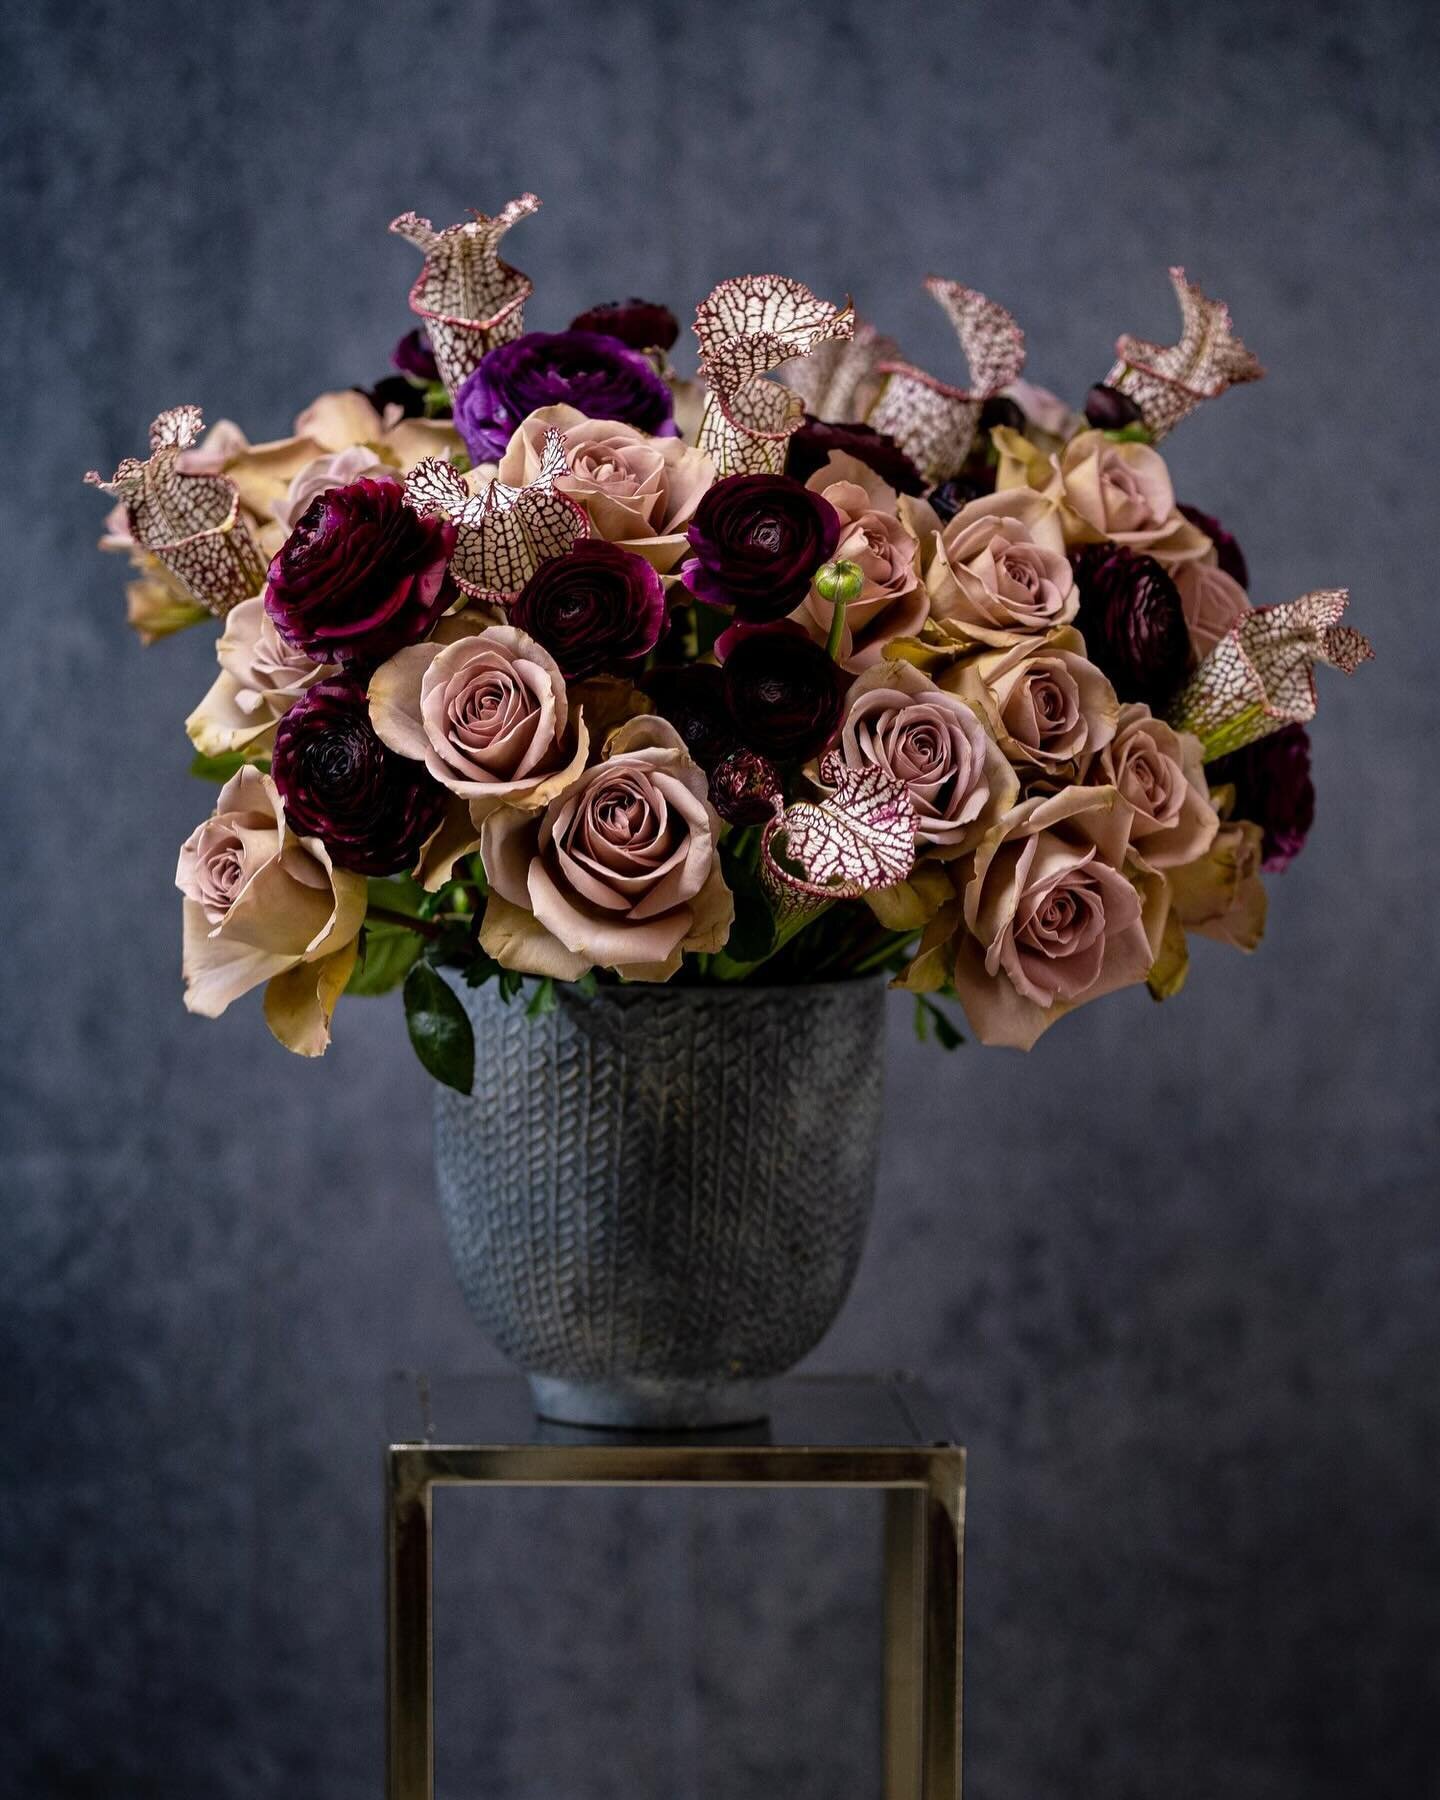 Oh The Drama. Order now to set the October mood. Head to www.rcinc.com today!
.
.
.
.
.
.
.
#flowerstagram #flowers #nyflorist #octobermood #ny #nyc